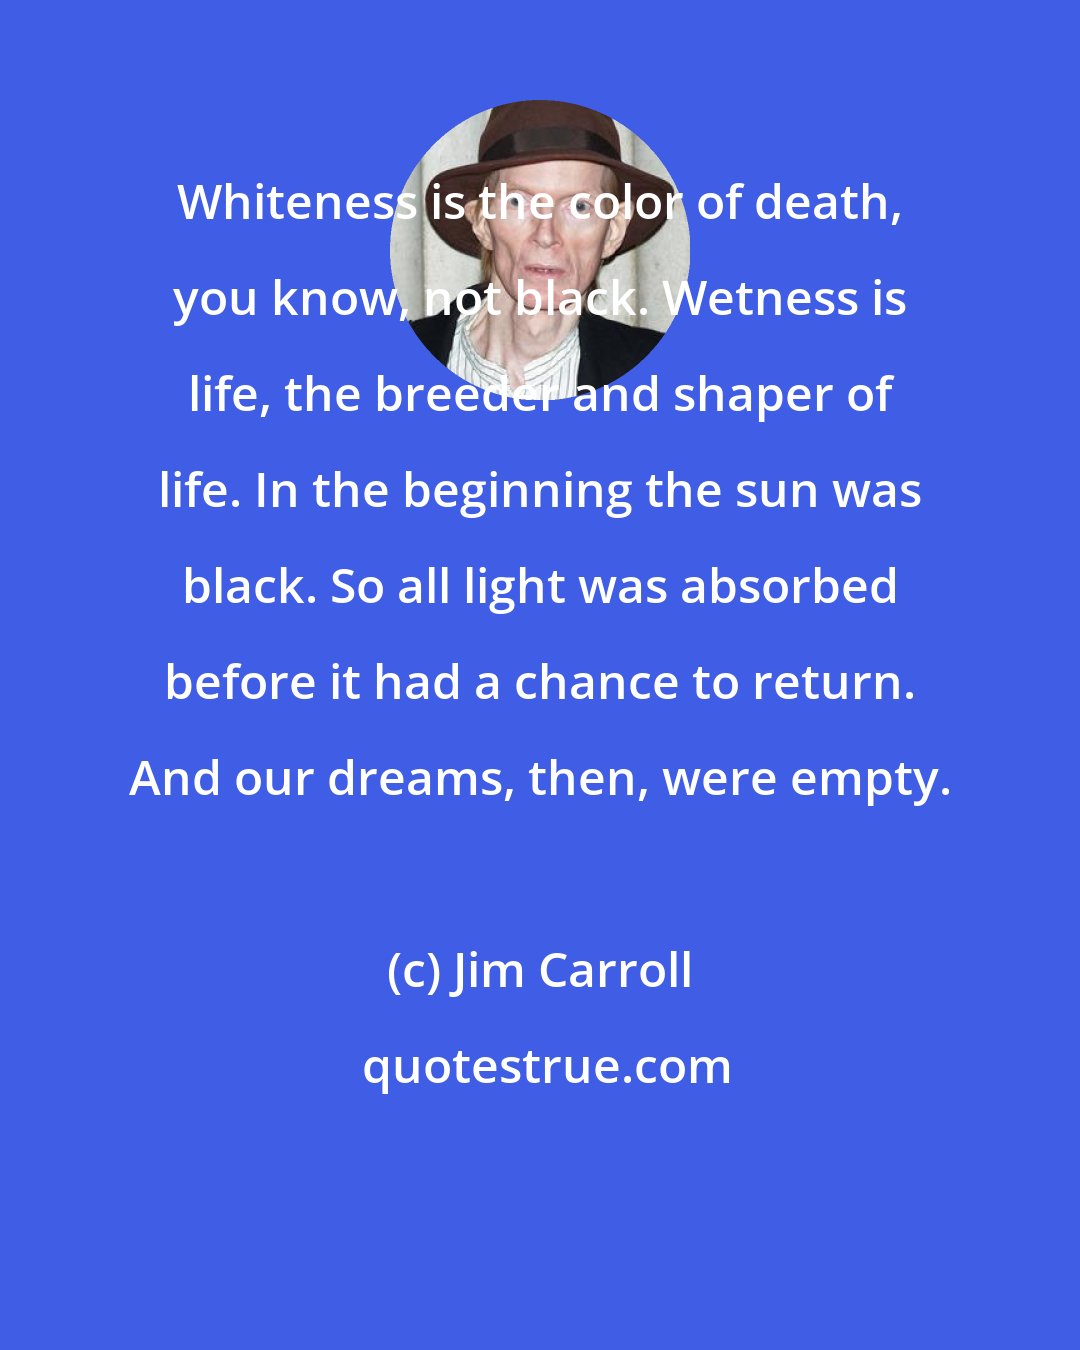 Jim Carroll: Whiteness is the color of death, you know, not black. Wetness is life, the breeder and shaper of life. In the beginning the sun was black. So all light was absorbed before it had a chance to return. And our dreams, then, were empty.